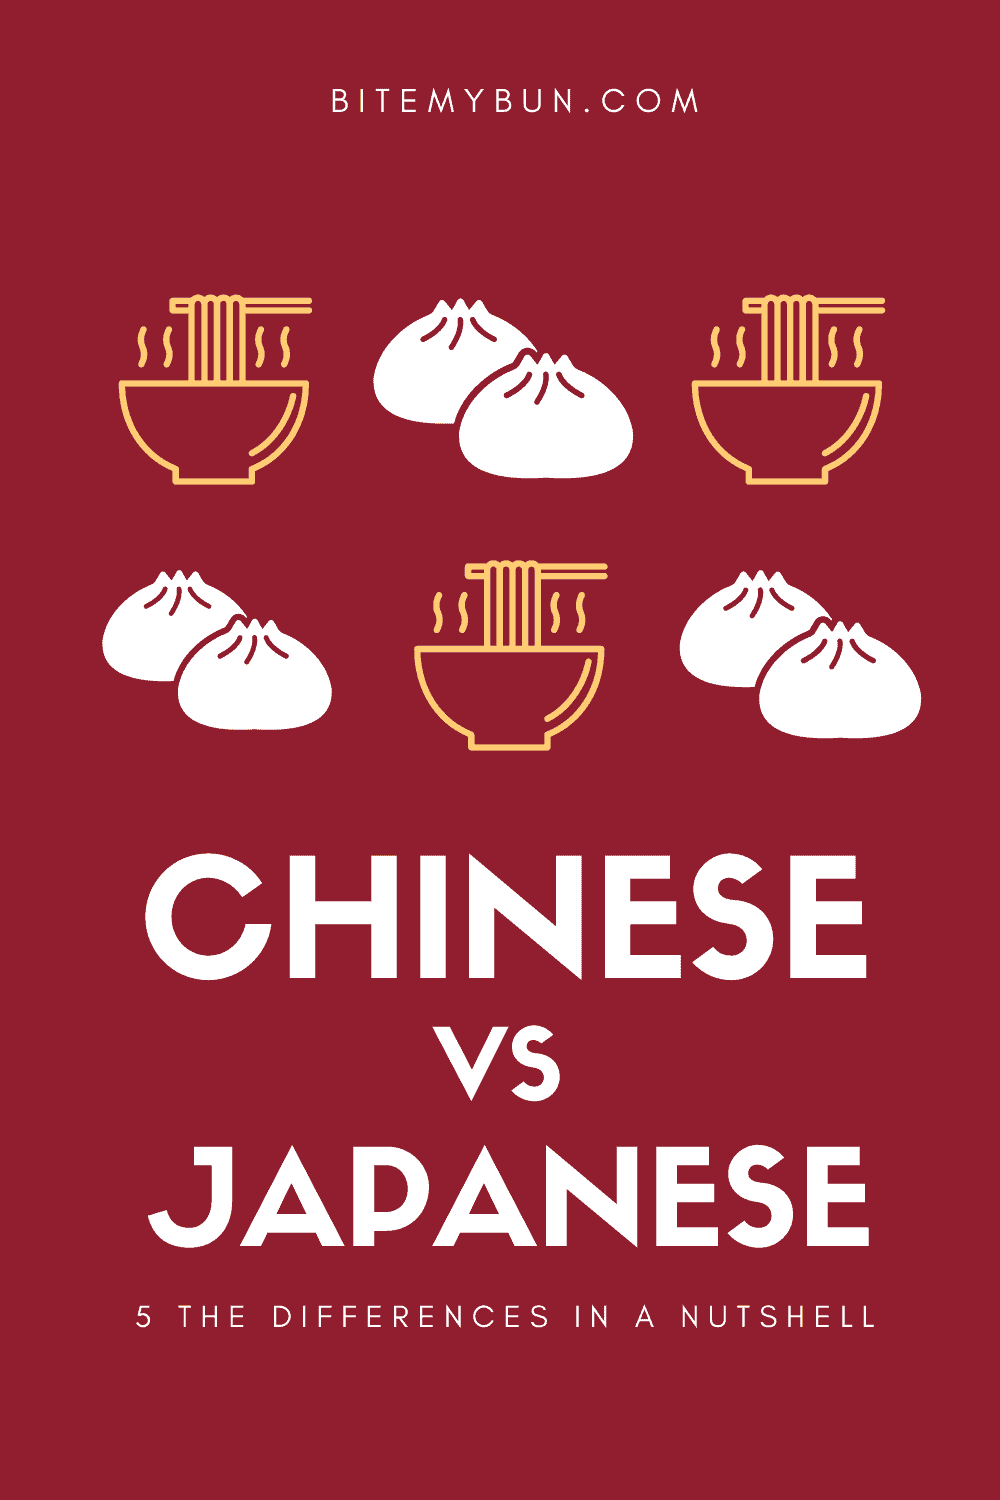 5 differences between Chinese and Japanese Food